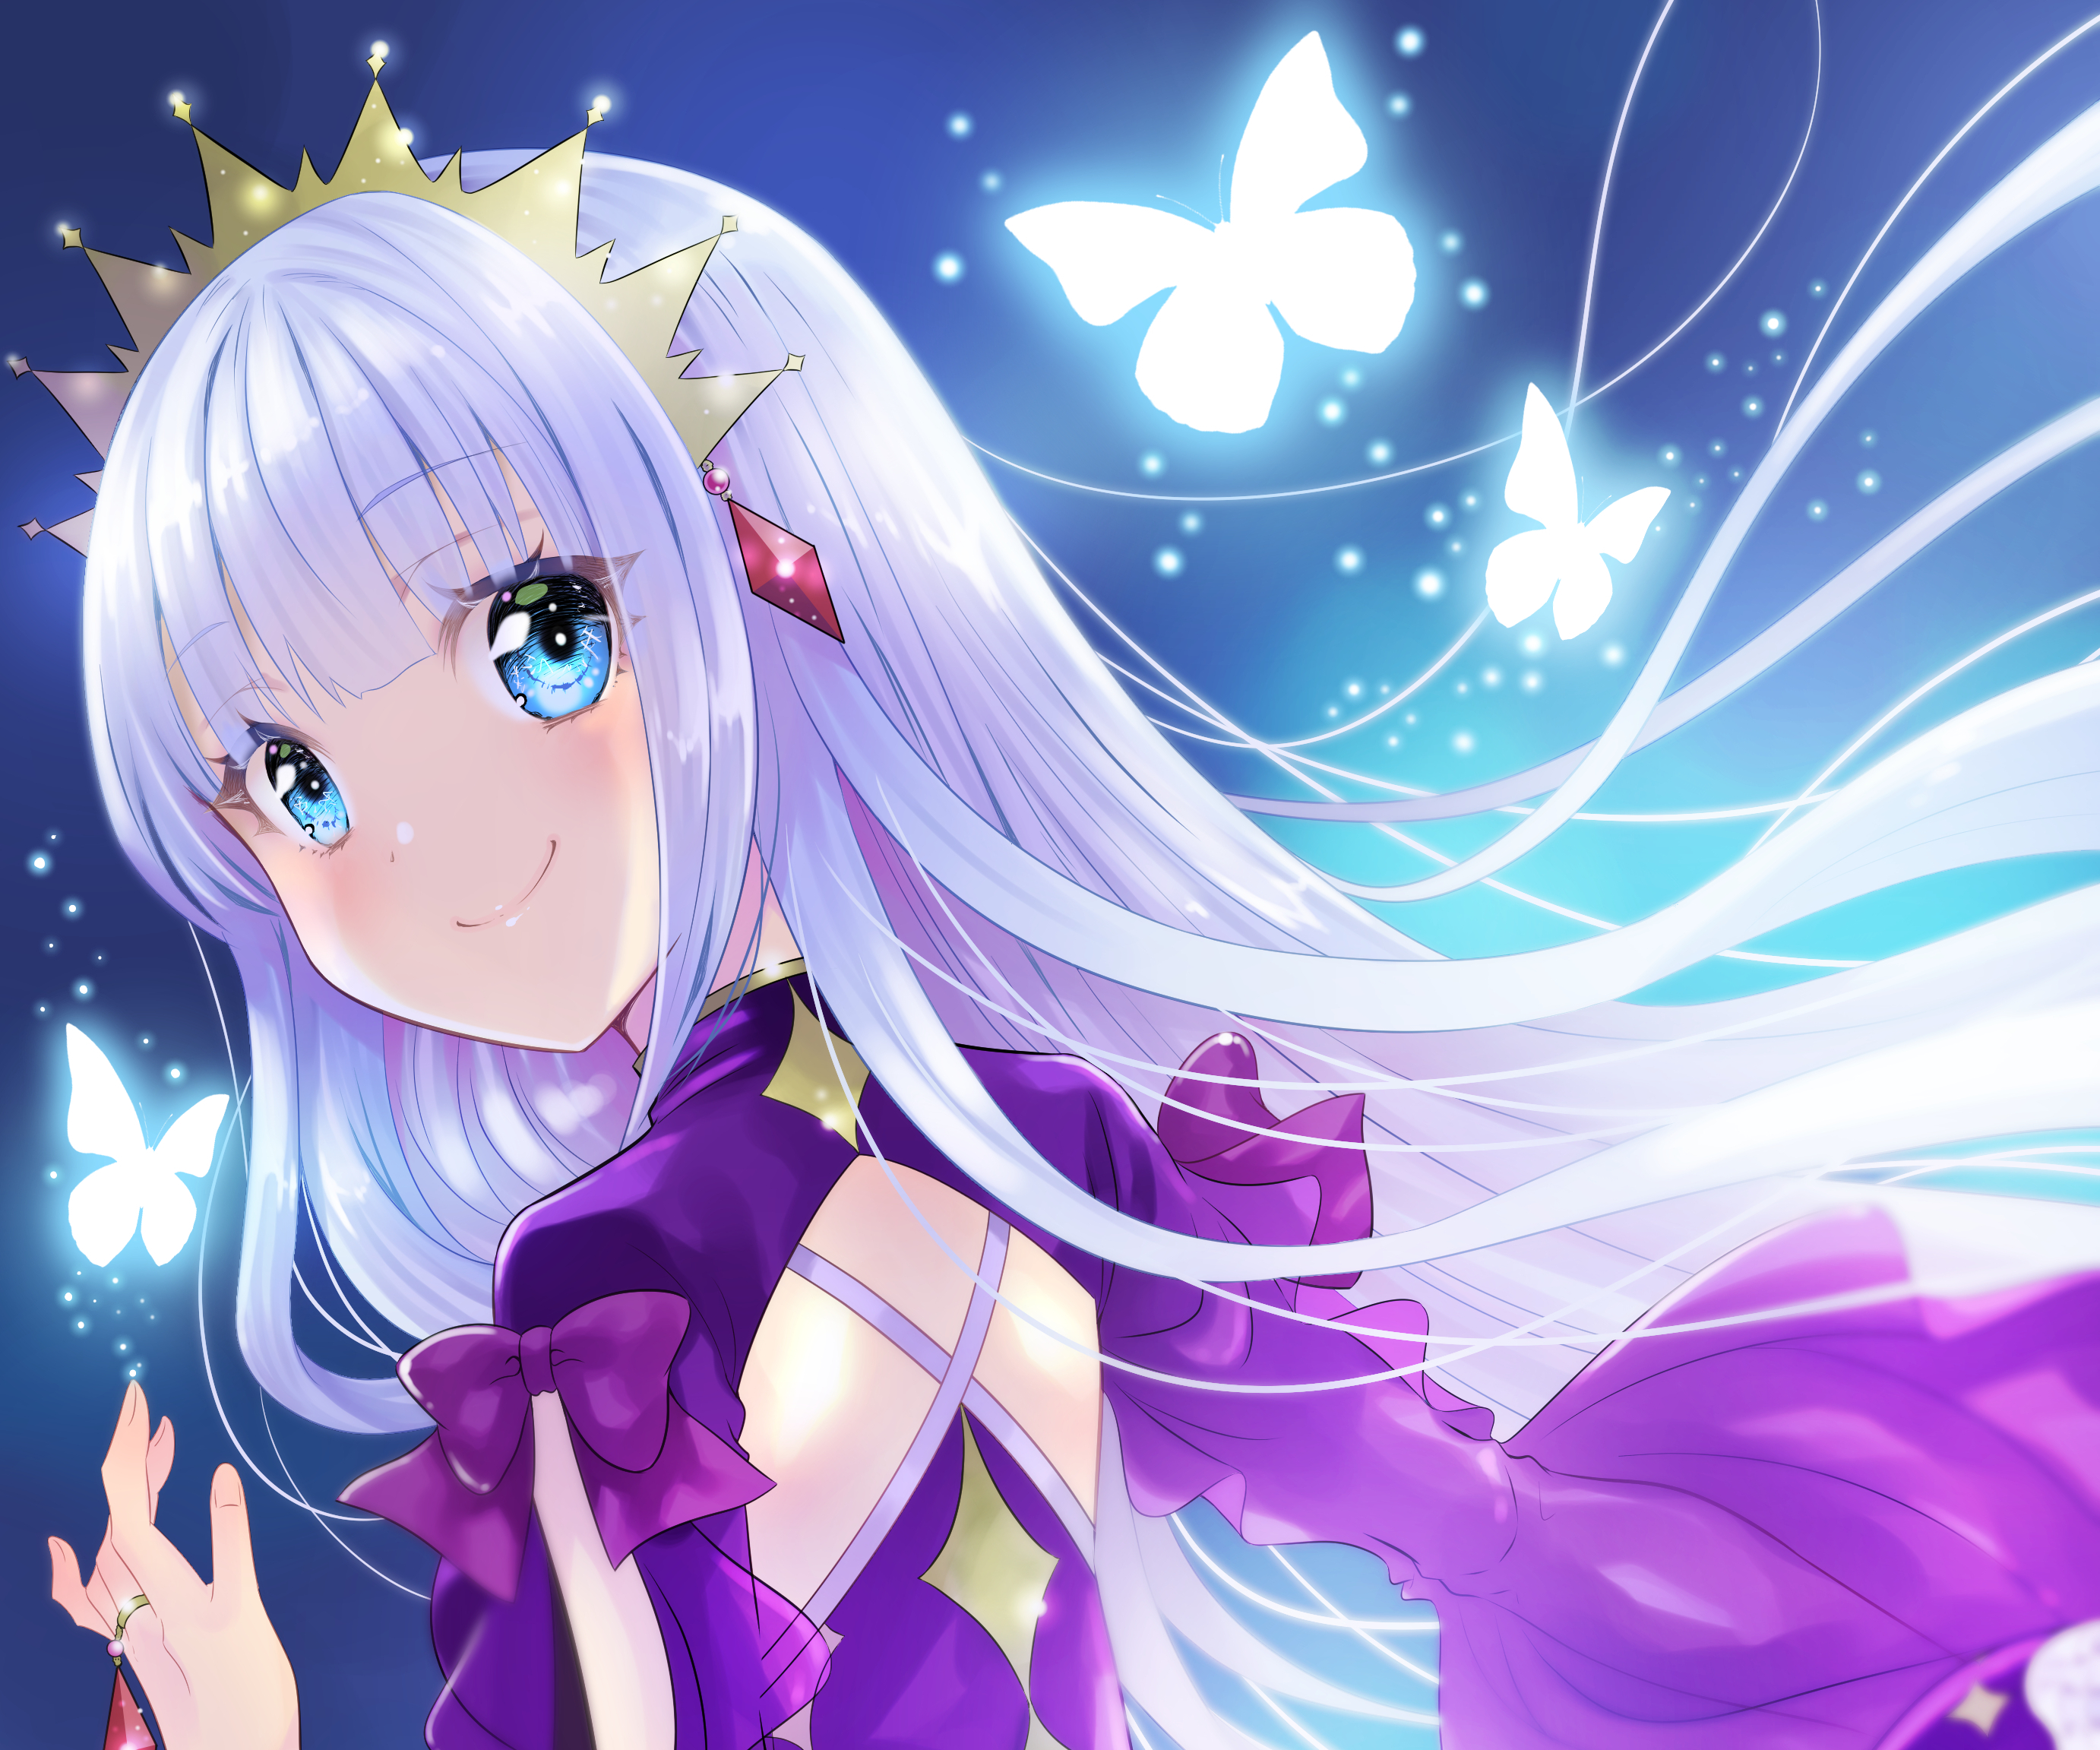 Anime She Professed Herself Pupil of the Wise Man HD Wallpaper | Background Image